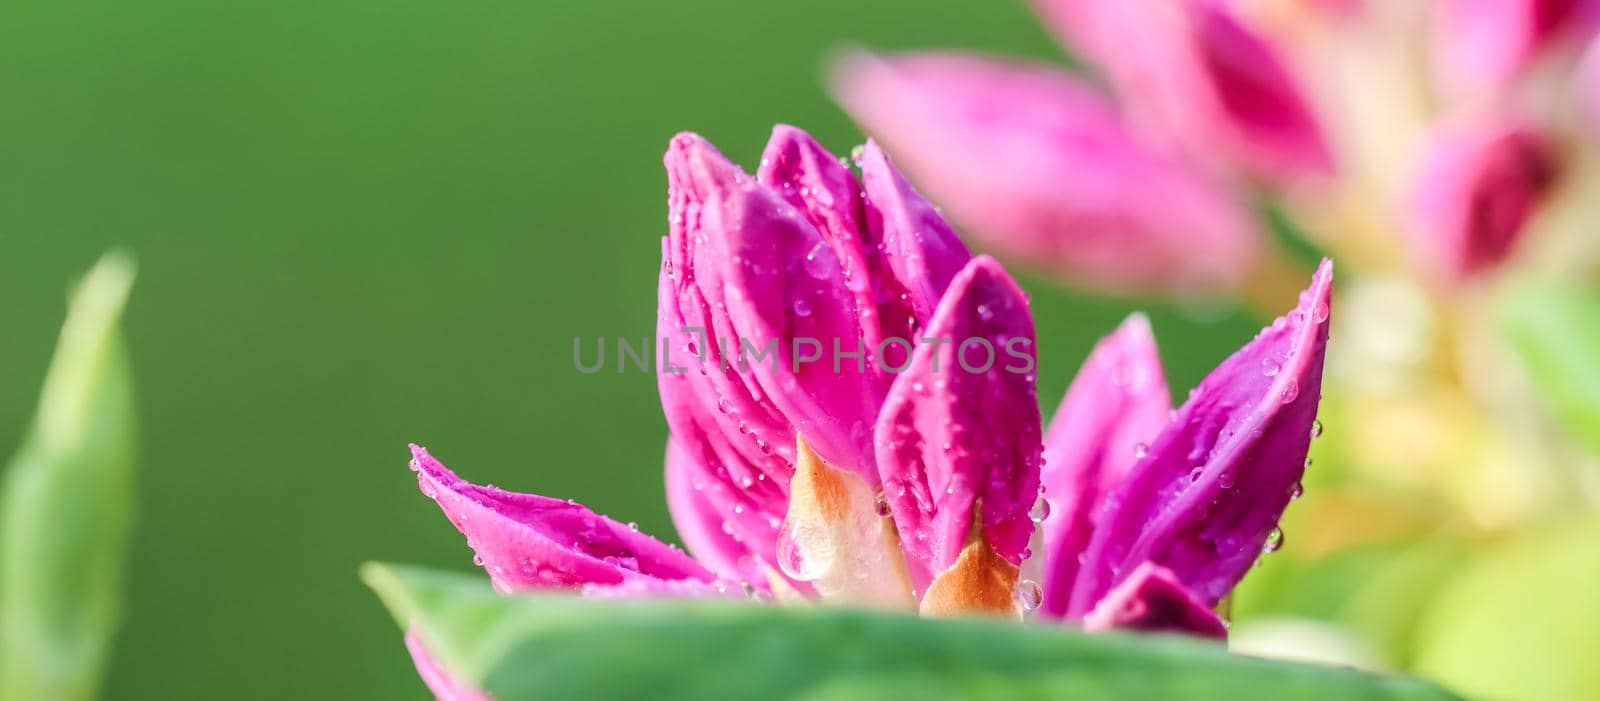 Botanical concept - Soft focus, abstract floral background, pink Rhododendron flower bud with dew drops. Macro flowers backdrop for holiday brand design